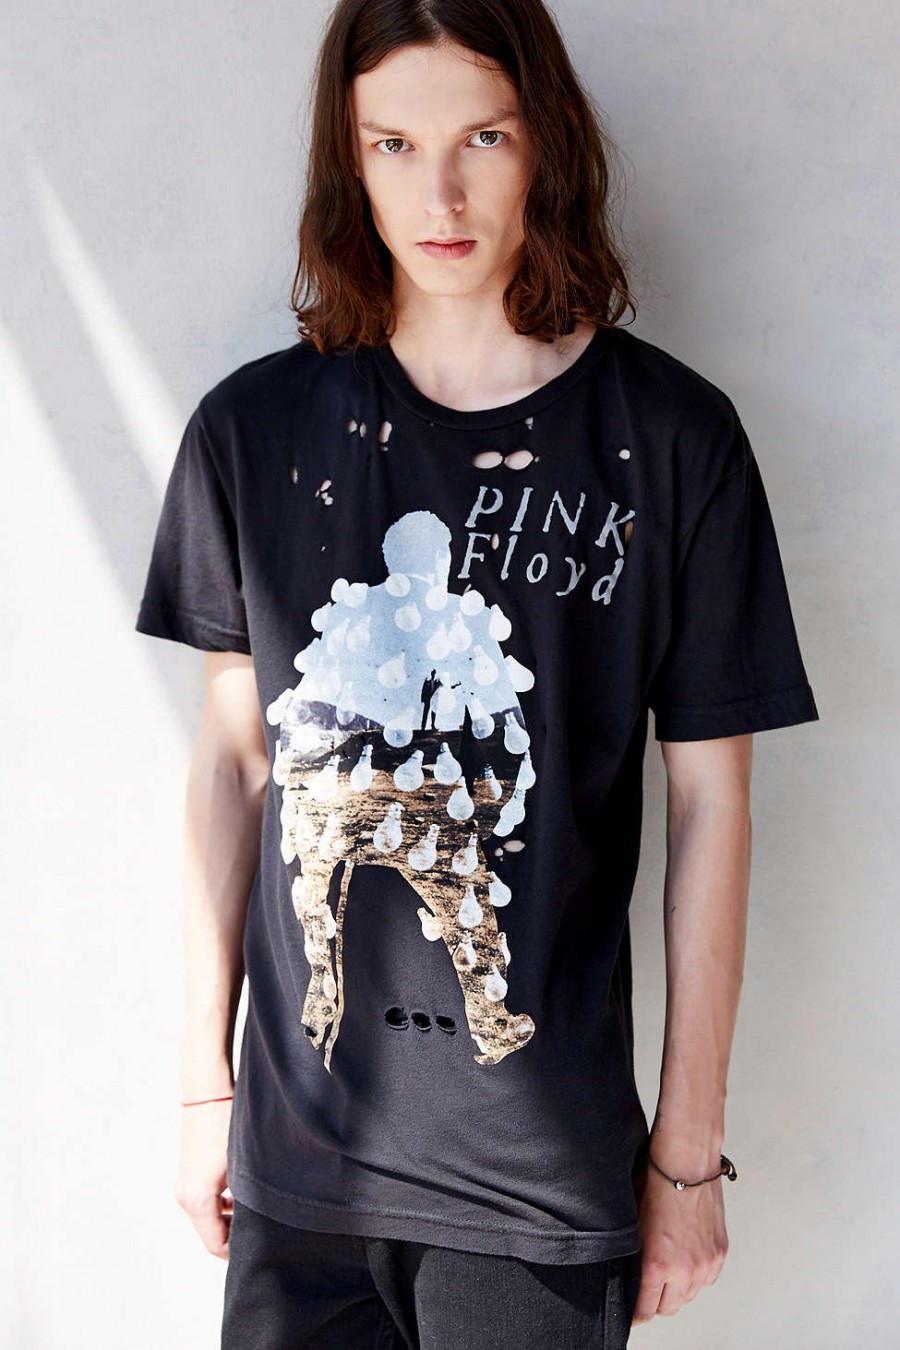 The band tee is a youthful staple that will most likely never go out of style. Show your impressive music knowledge by representing a band like Pink Floyd. Pink Floyd Destroyed Tee from Urban Outfitters.